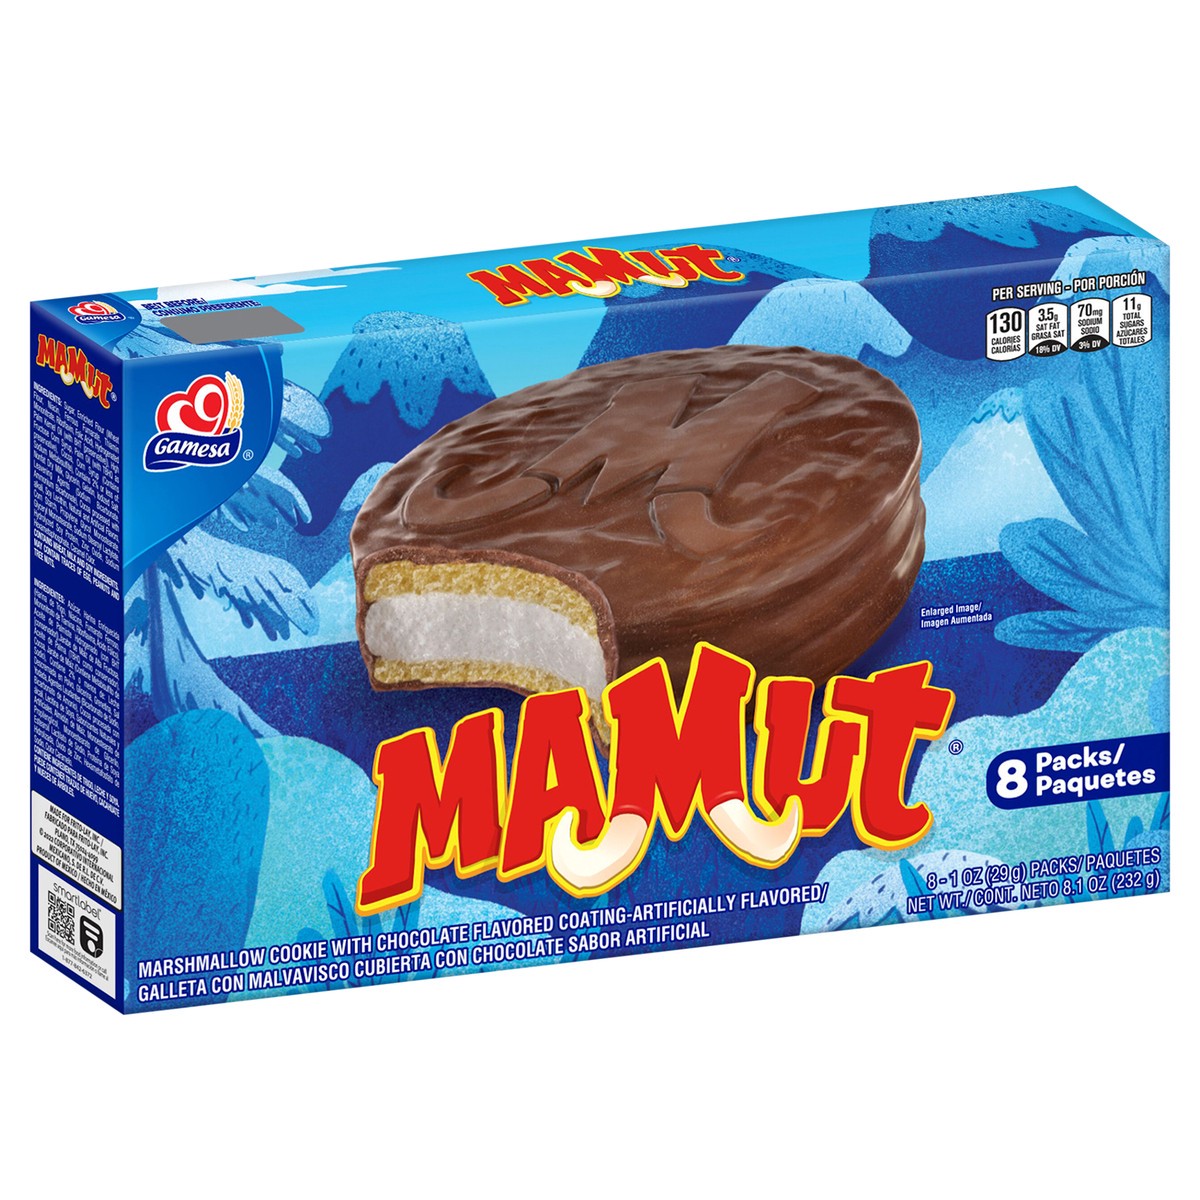 slide 2 of 6, Gamesa Mamut Marshmallow Cookies With Chocolate Flavored 1 Oz 8 Count, 8.1 oz